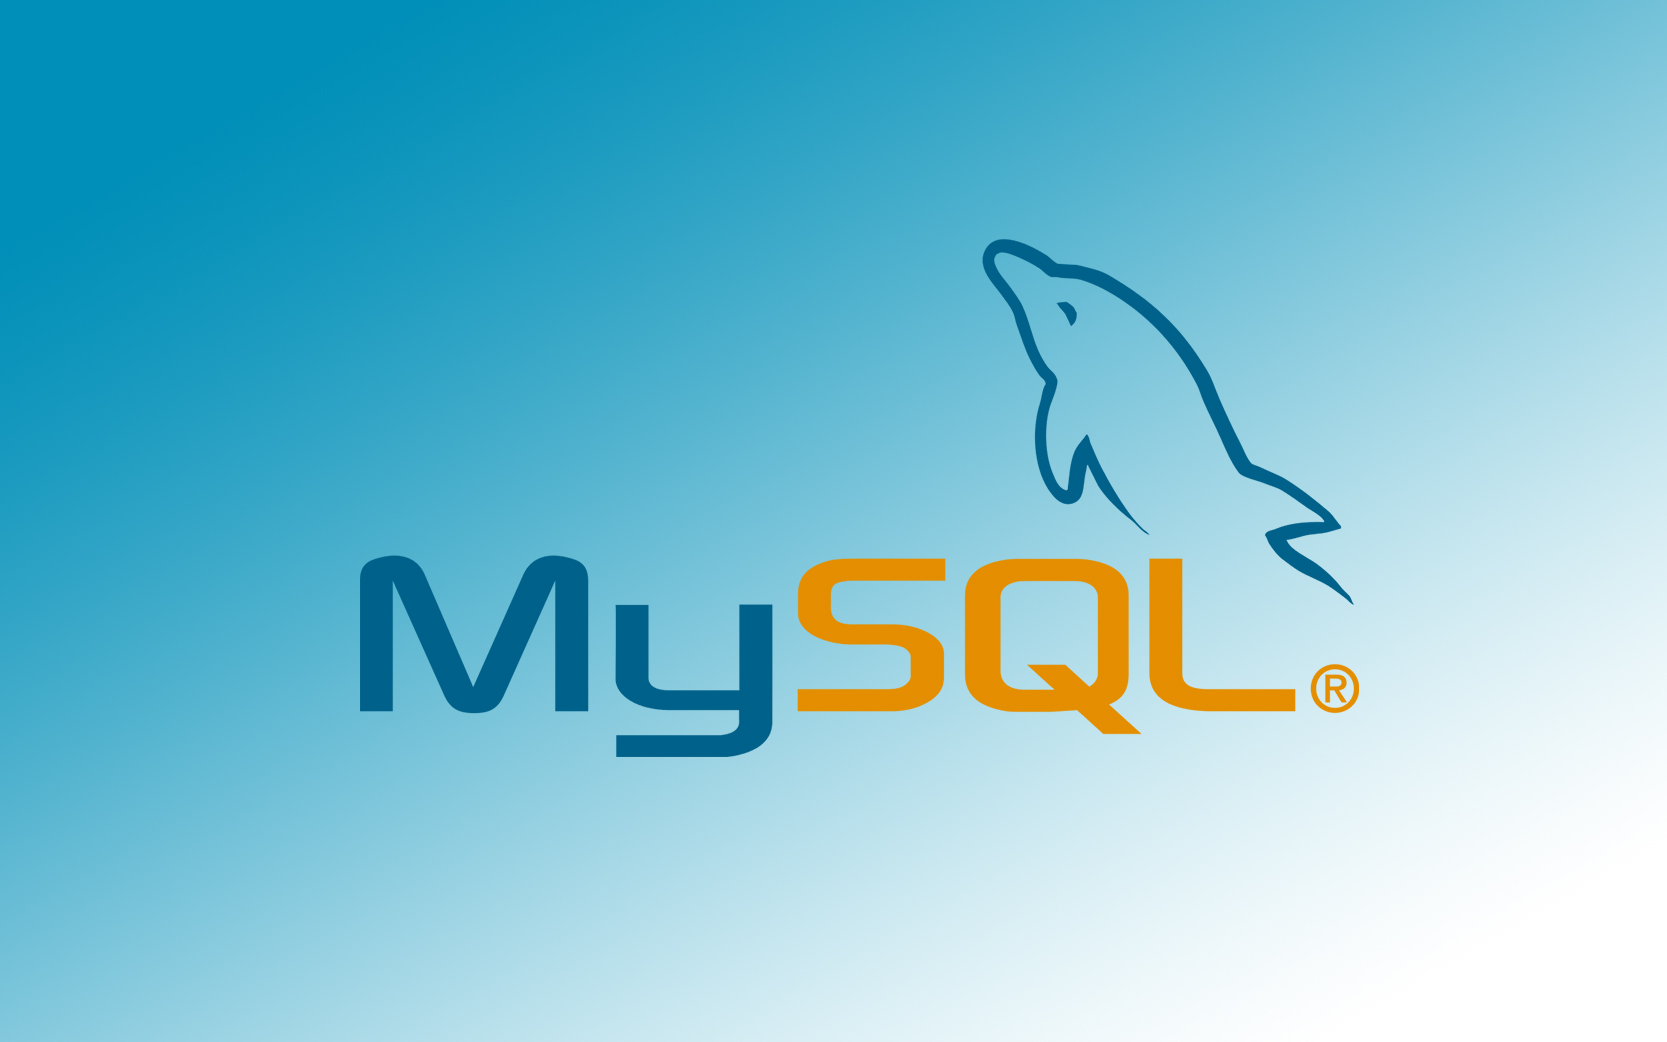 Oracle SQL-training-in-bangalore-by-zekelabs